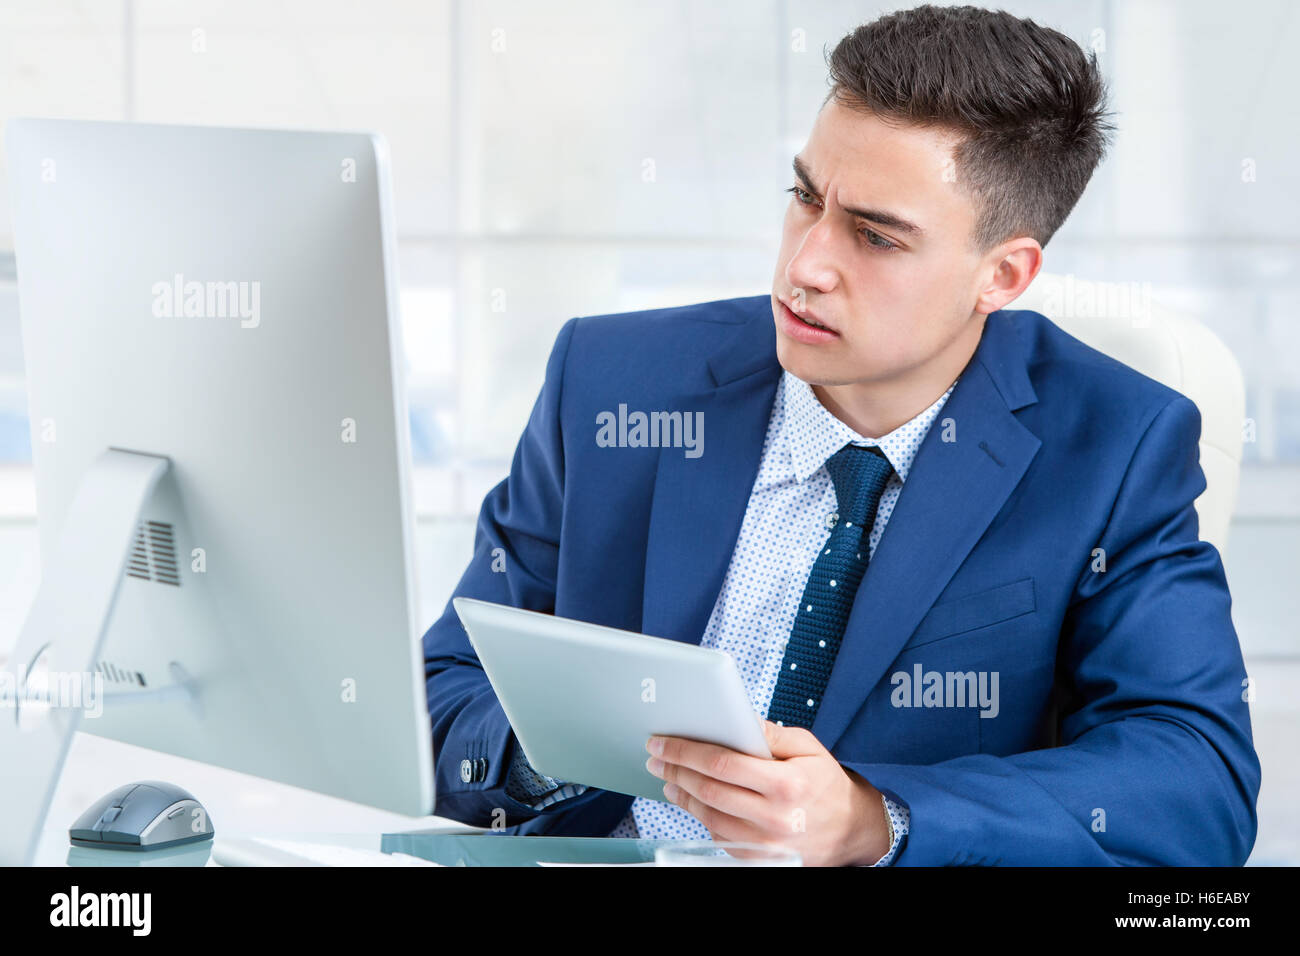 Close up portrait of young Businessman synchronizing digital tablet with computer. Young man sharing information on devices. Stock Photo